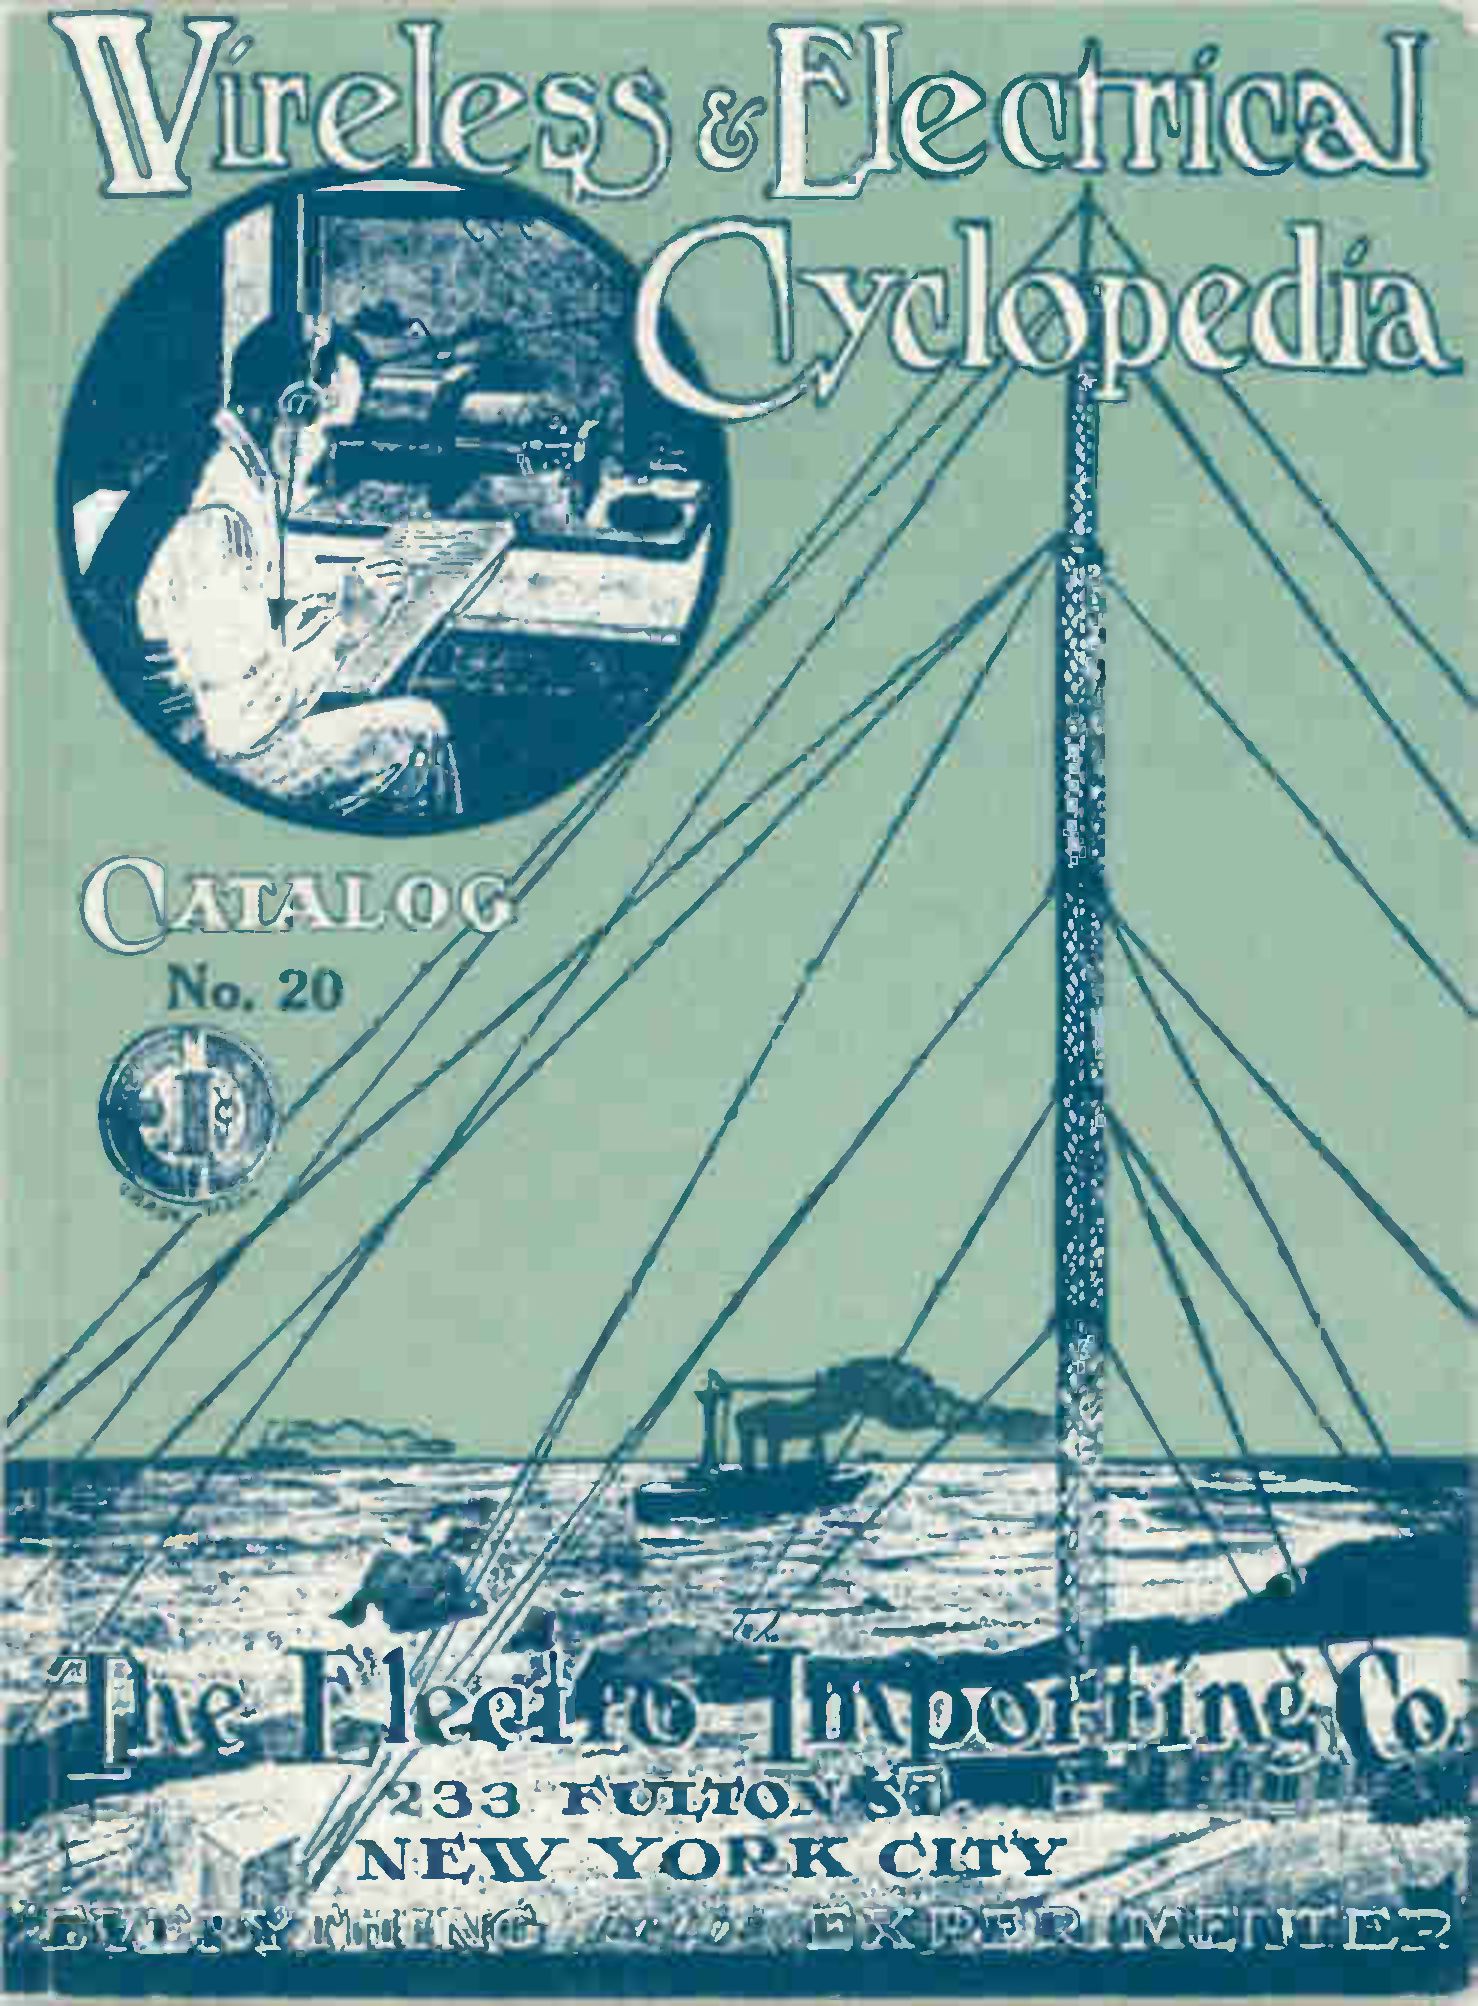 Wireless and electrical Cyclopedia 1918